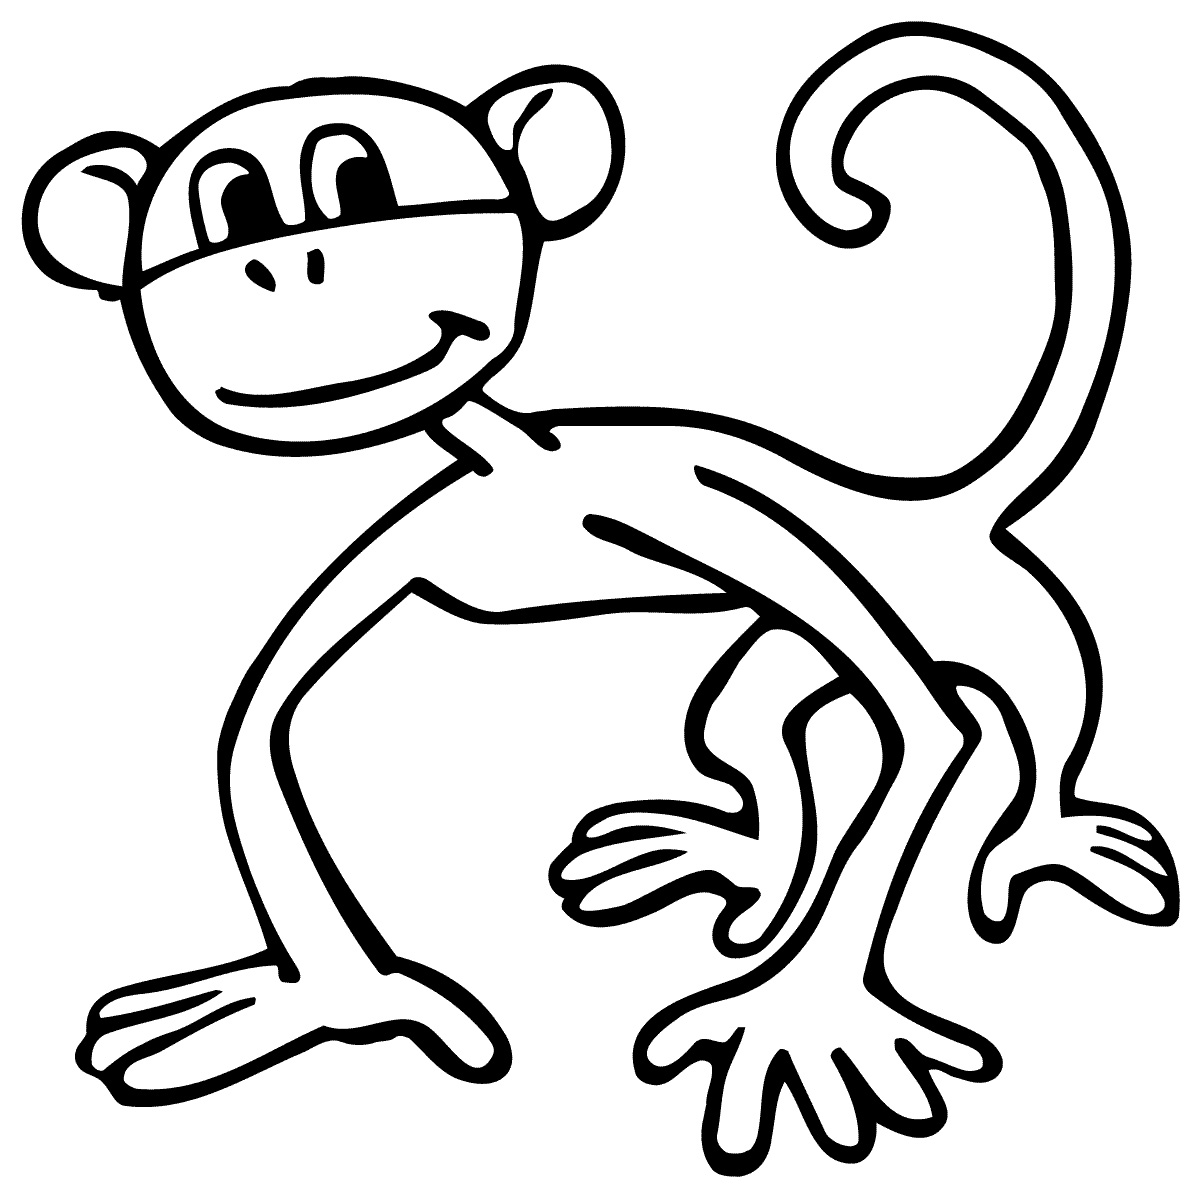 Spider Monkey clipart #1, Download drawings